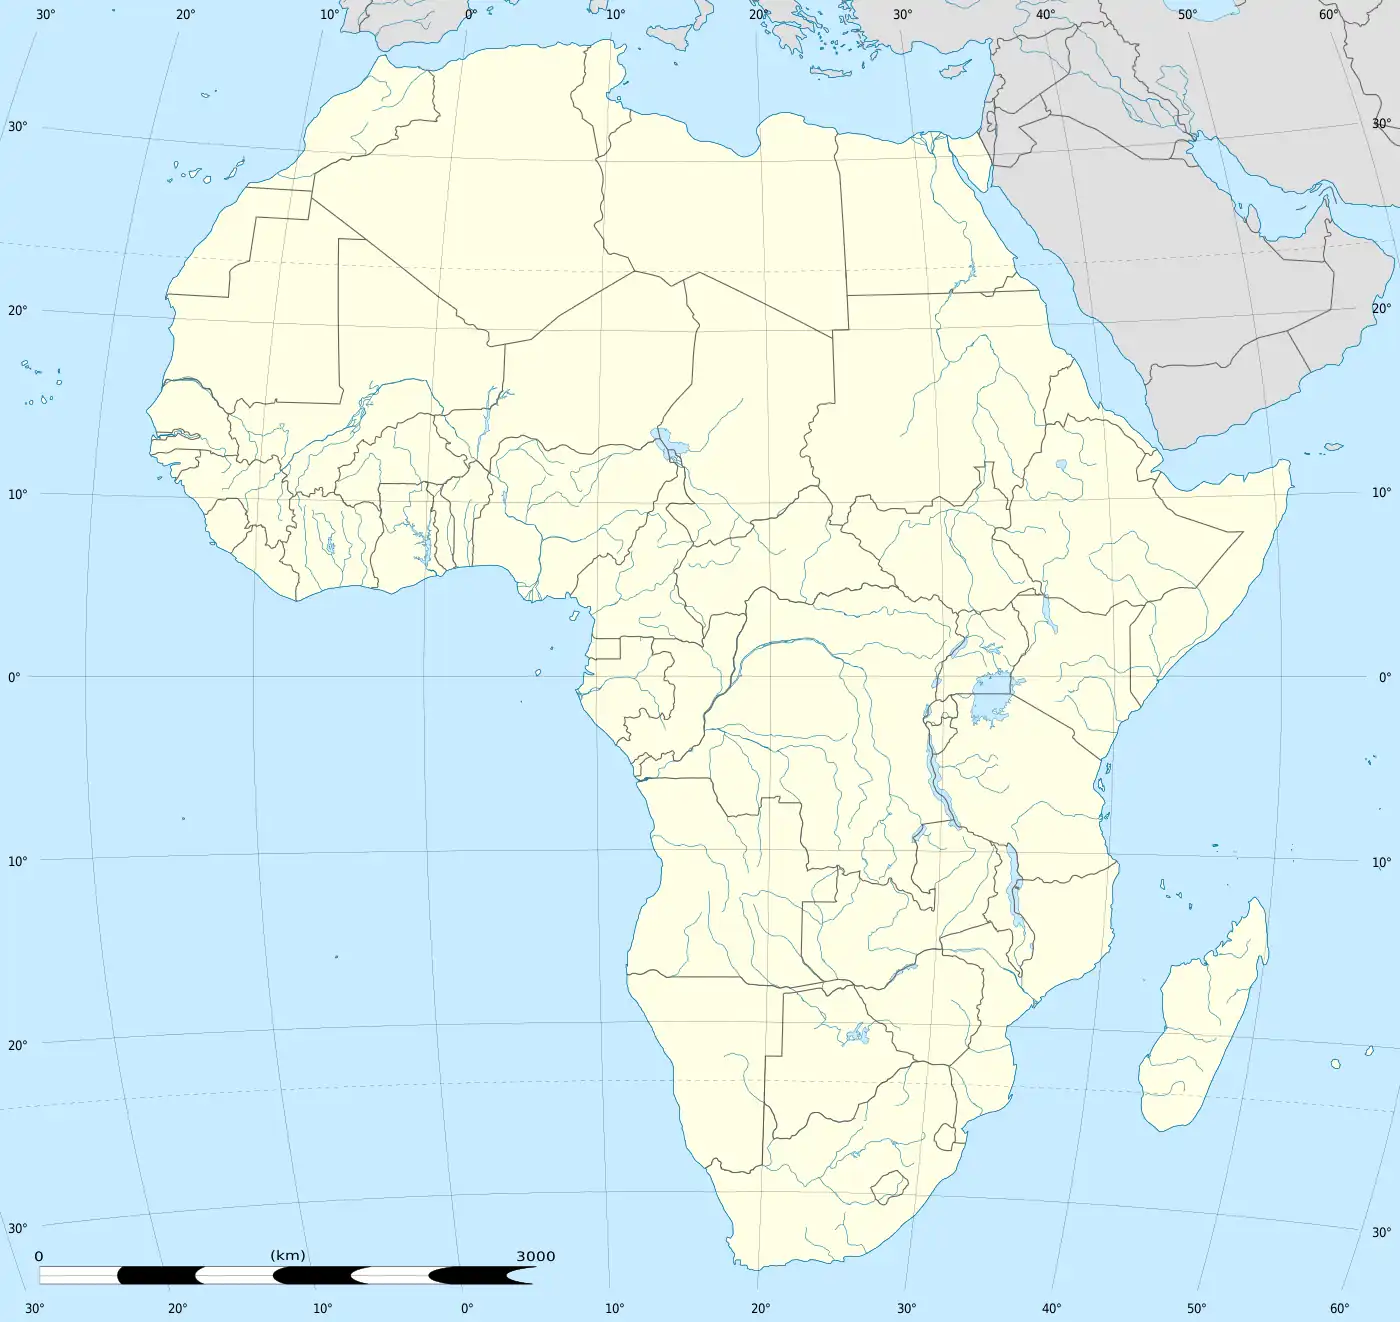 Shire is located in Africa